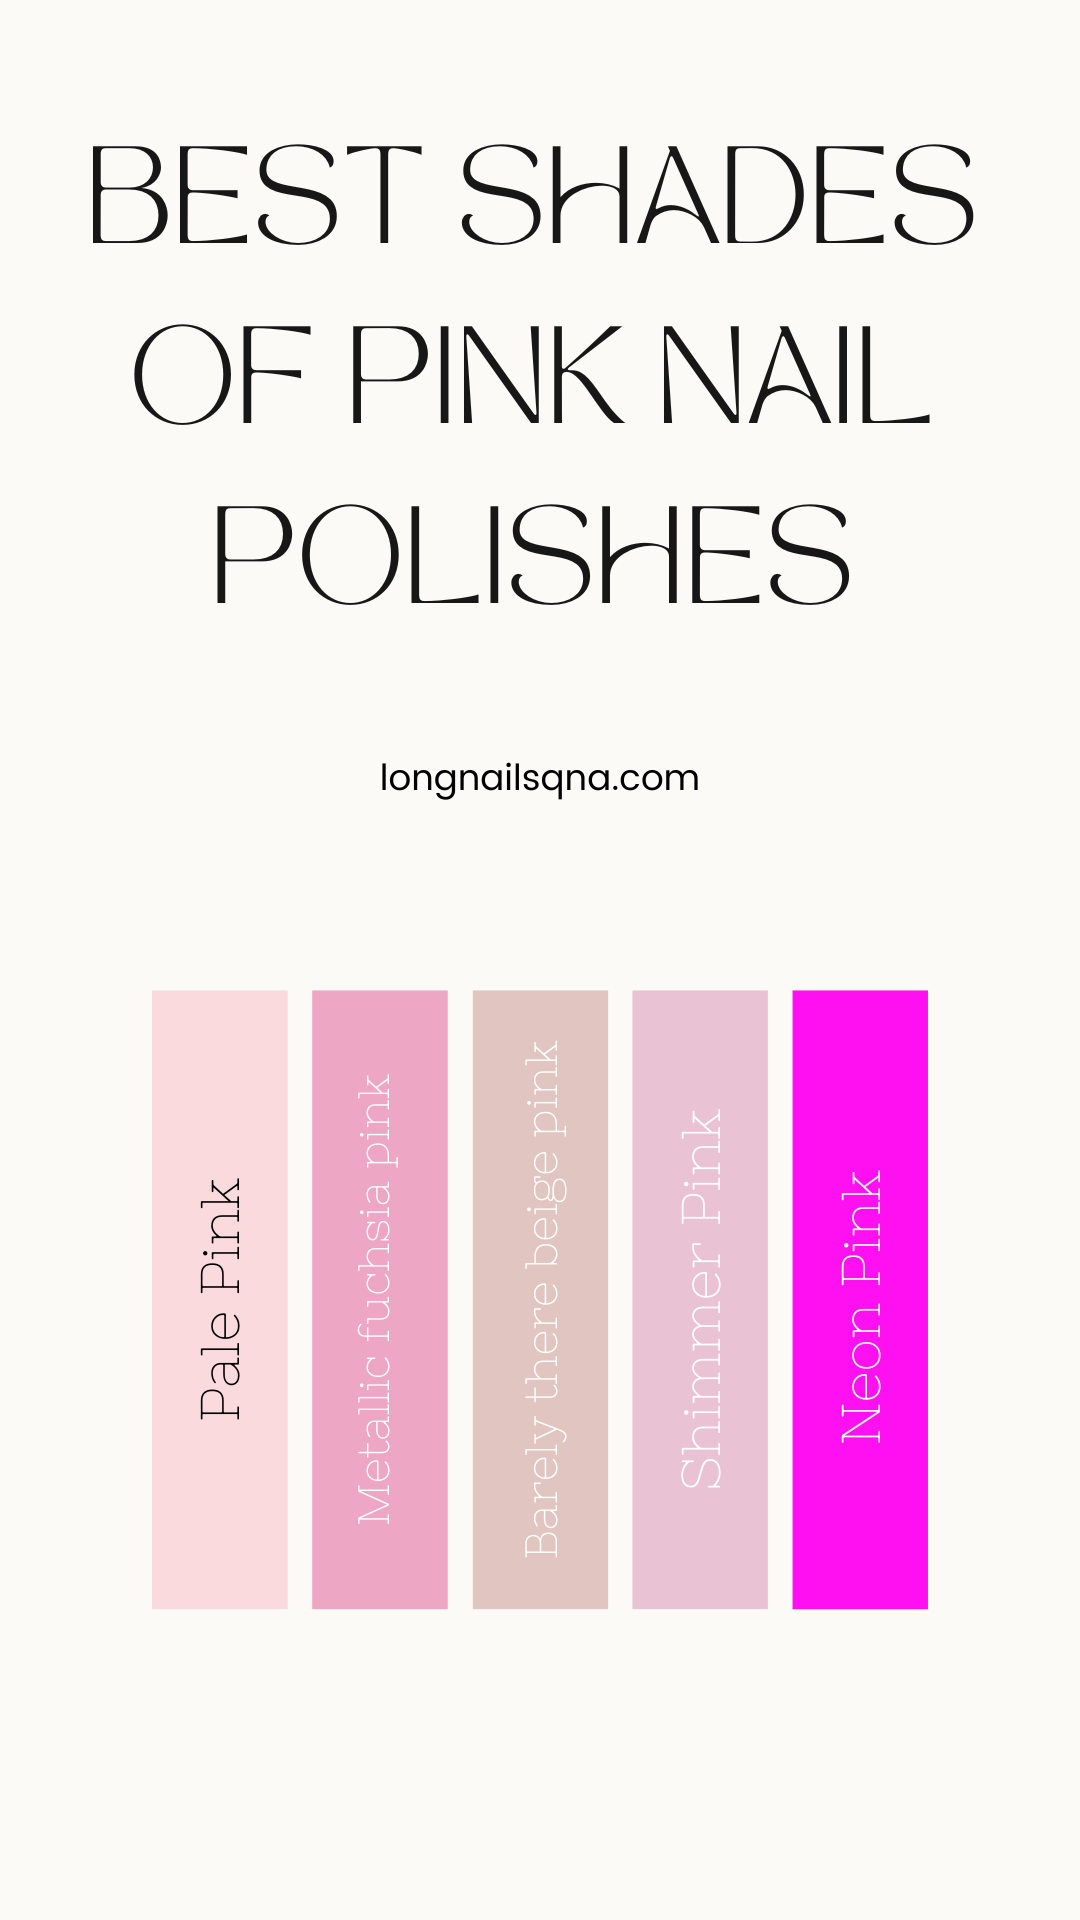 What Does Pink Nail Polish Mean?